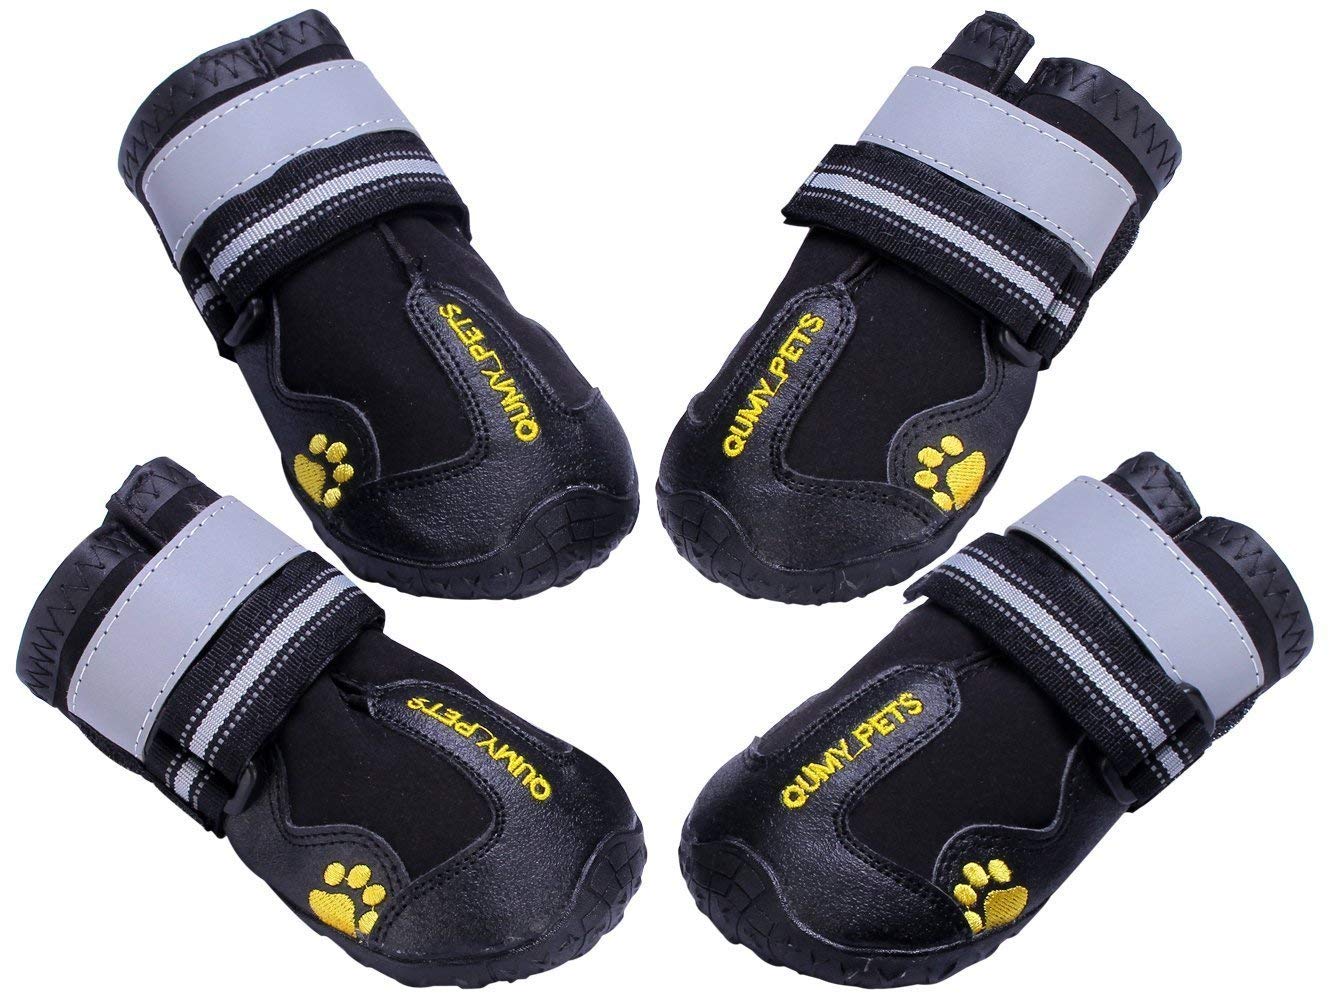 Winter Coats for Dogs: Winter Boots for Dogs